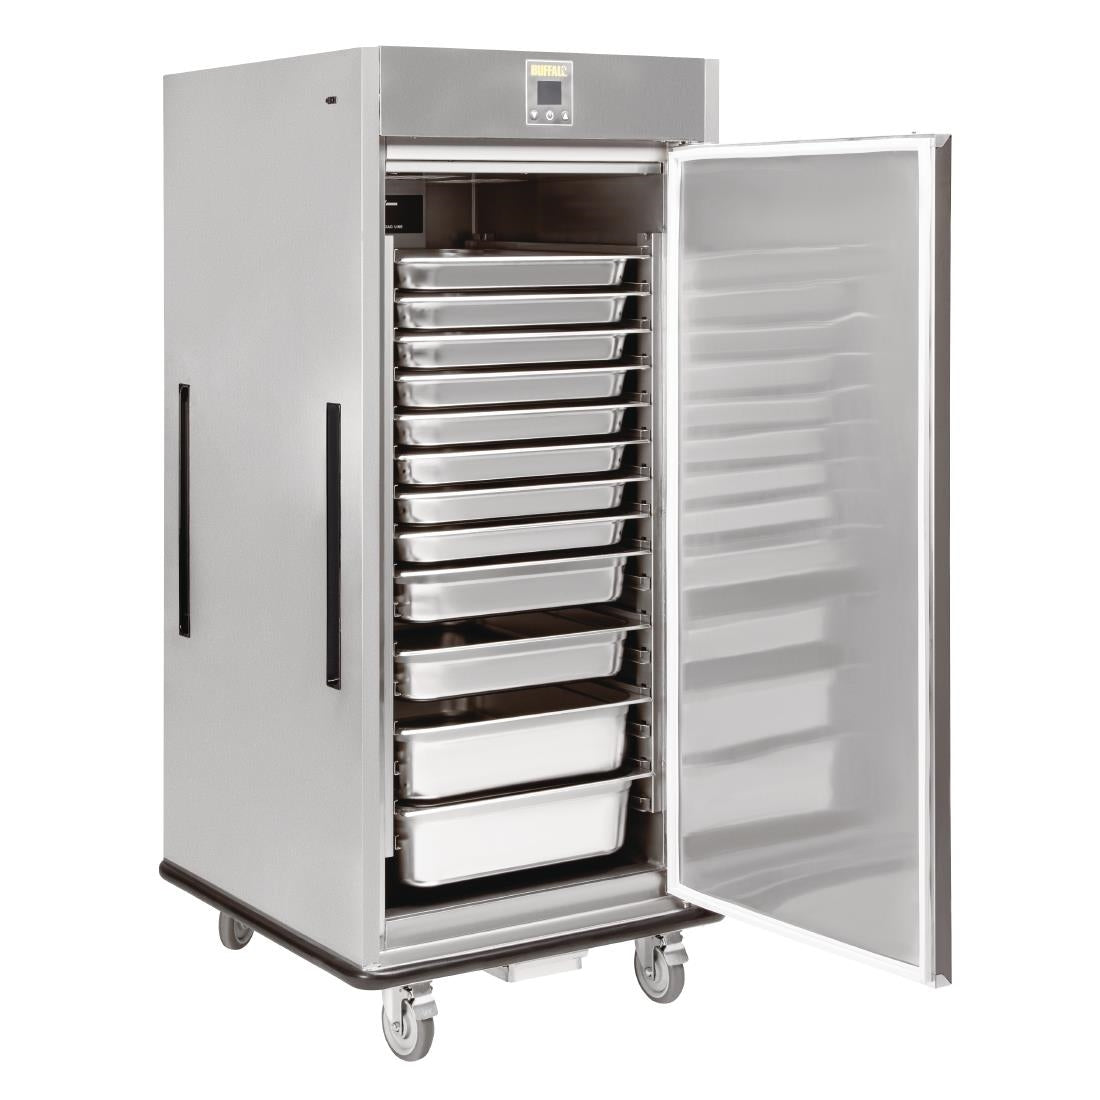 CP829 Buffalo Heated Banquet Cabinet 16 x 2/1GN JD Catering Equipment Solutions Ltd